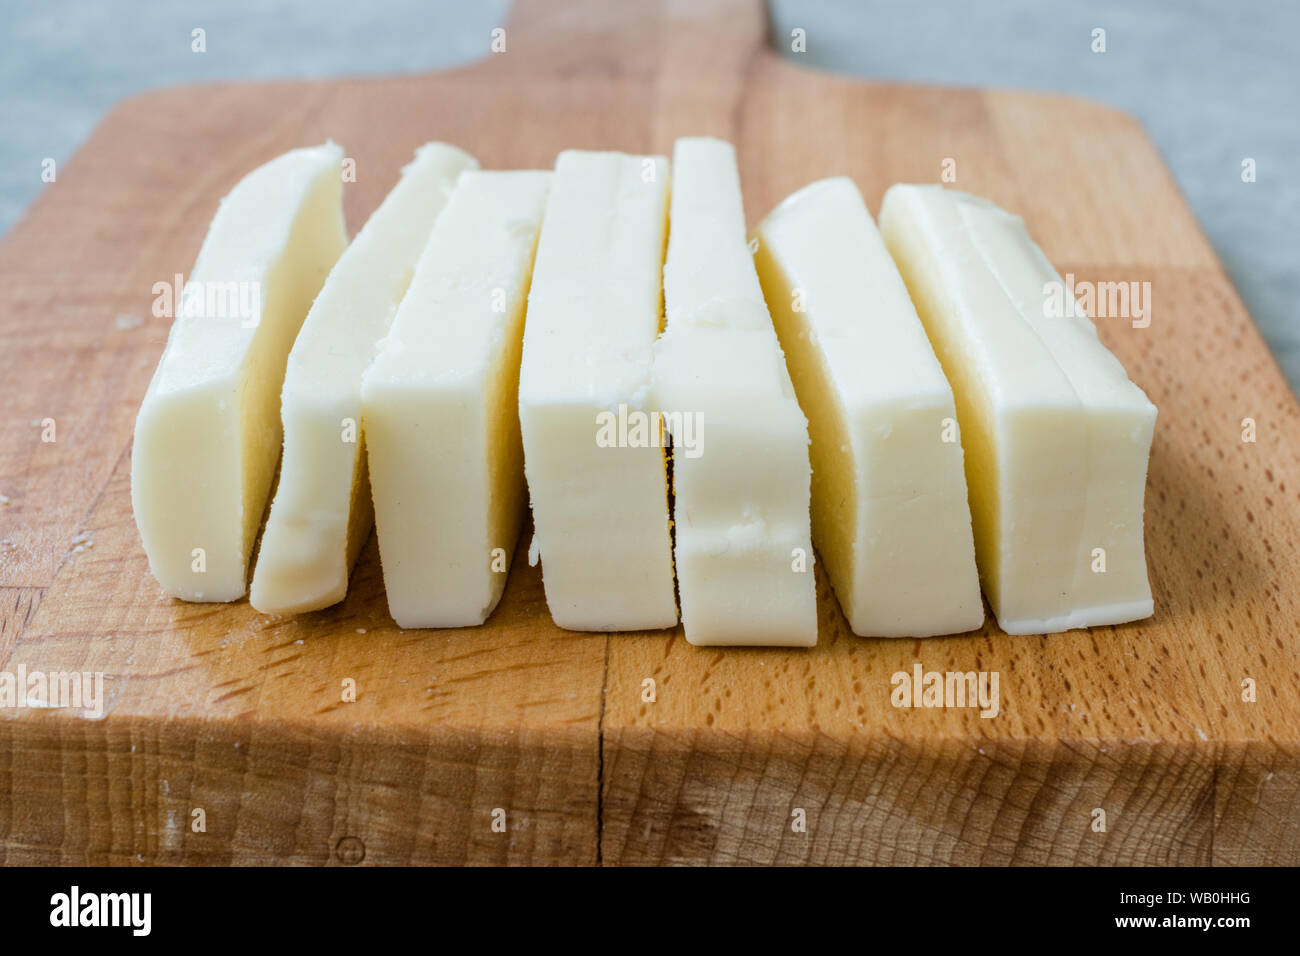 String Cheese Slices for a Snack / Turkish Dil Peyniri. Traditional Organic Food. Stock Photo